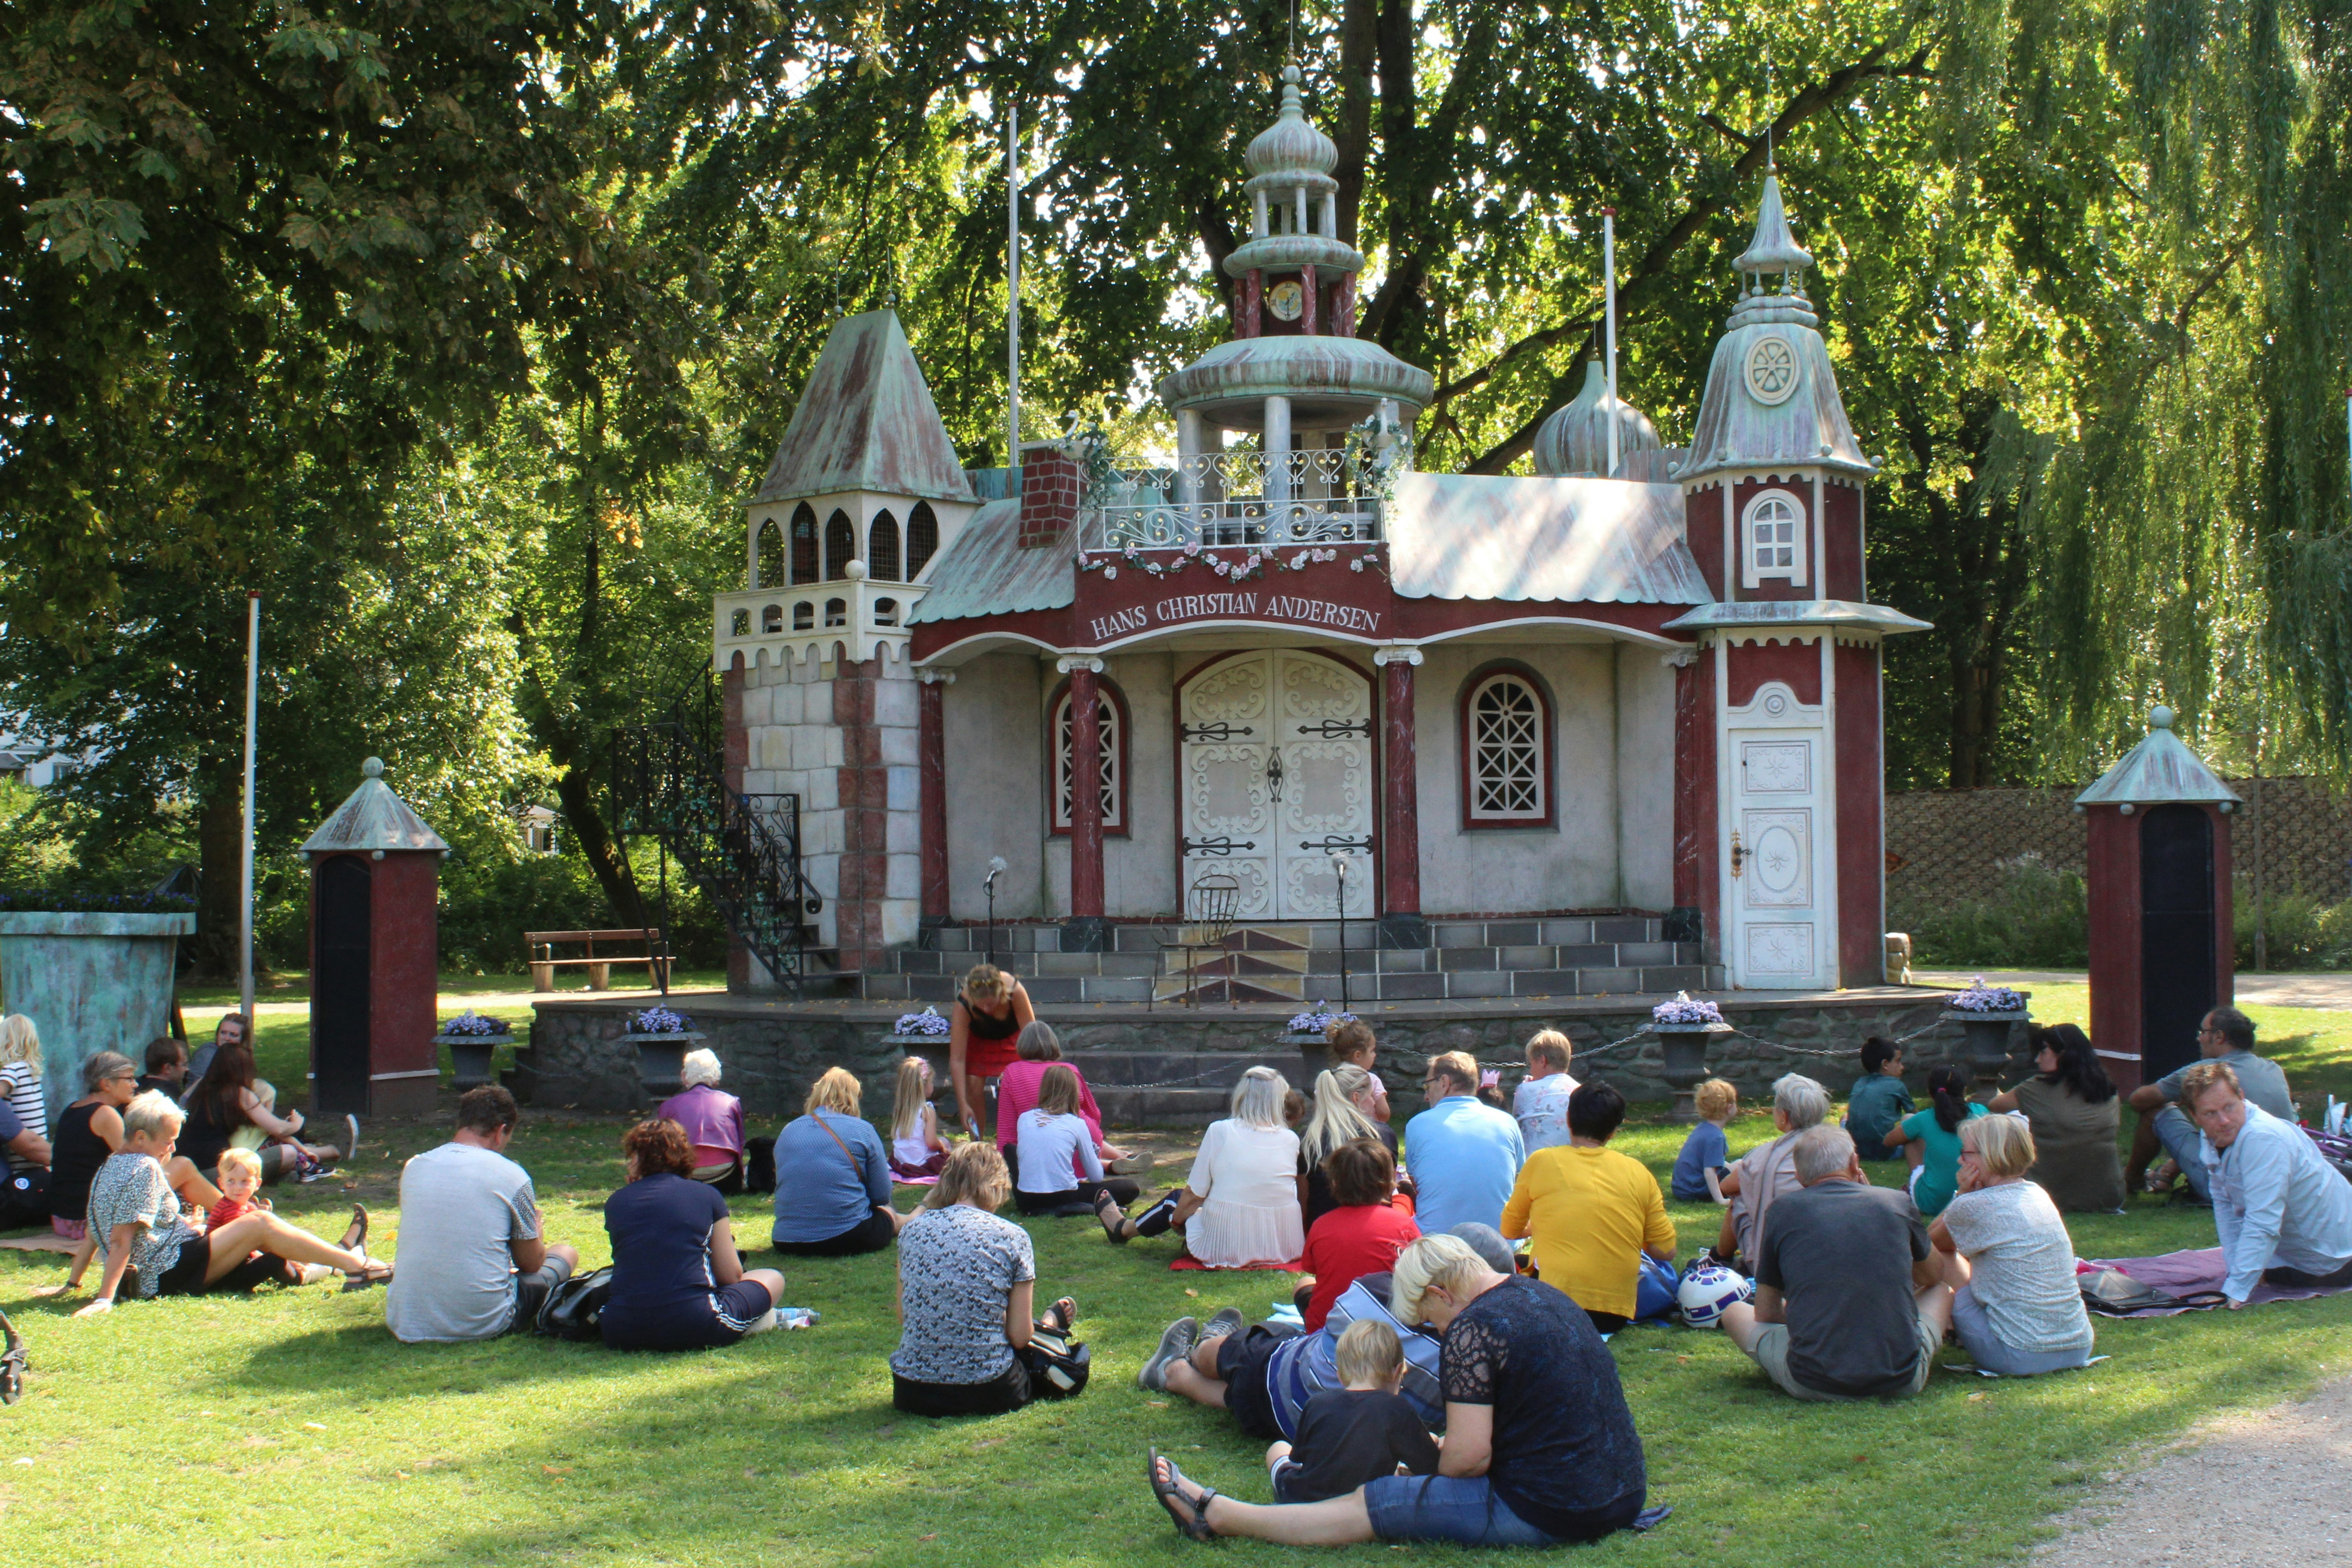 Families are sitting on the grass in a park on Eventyrhaven island, facing the stage of the miniature Hans Christian Andersen castle.